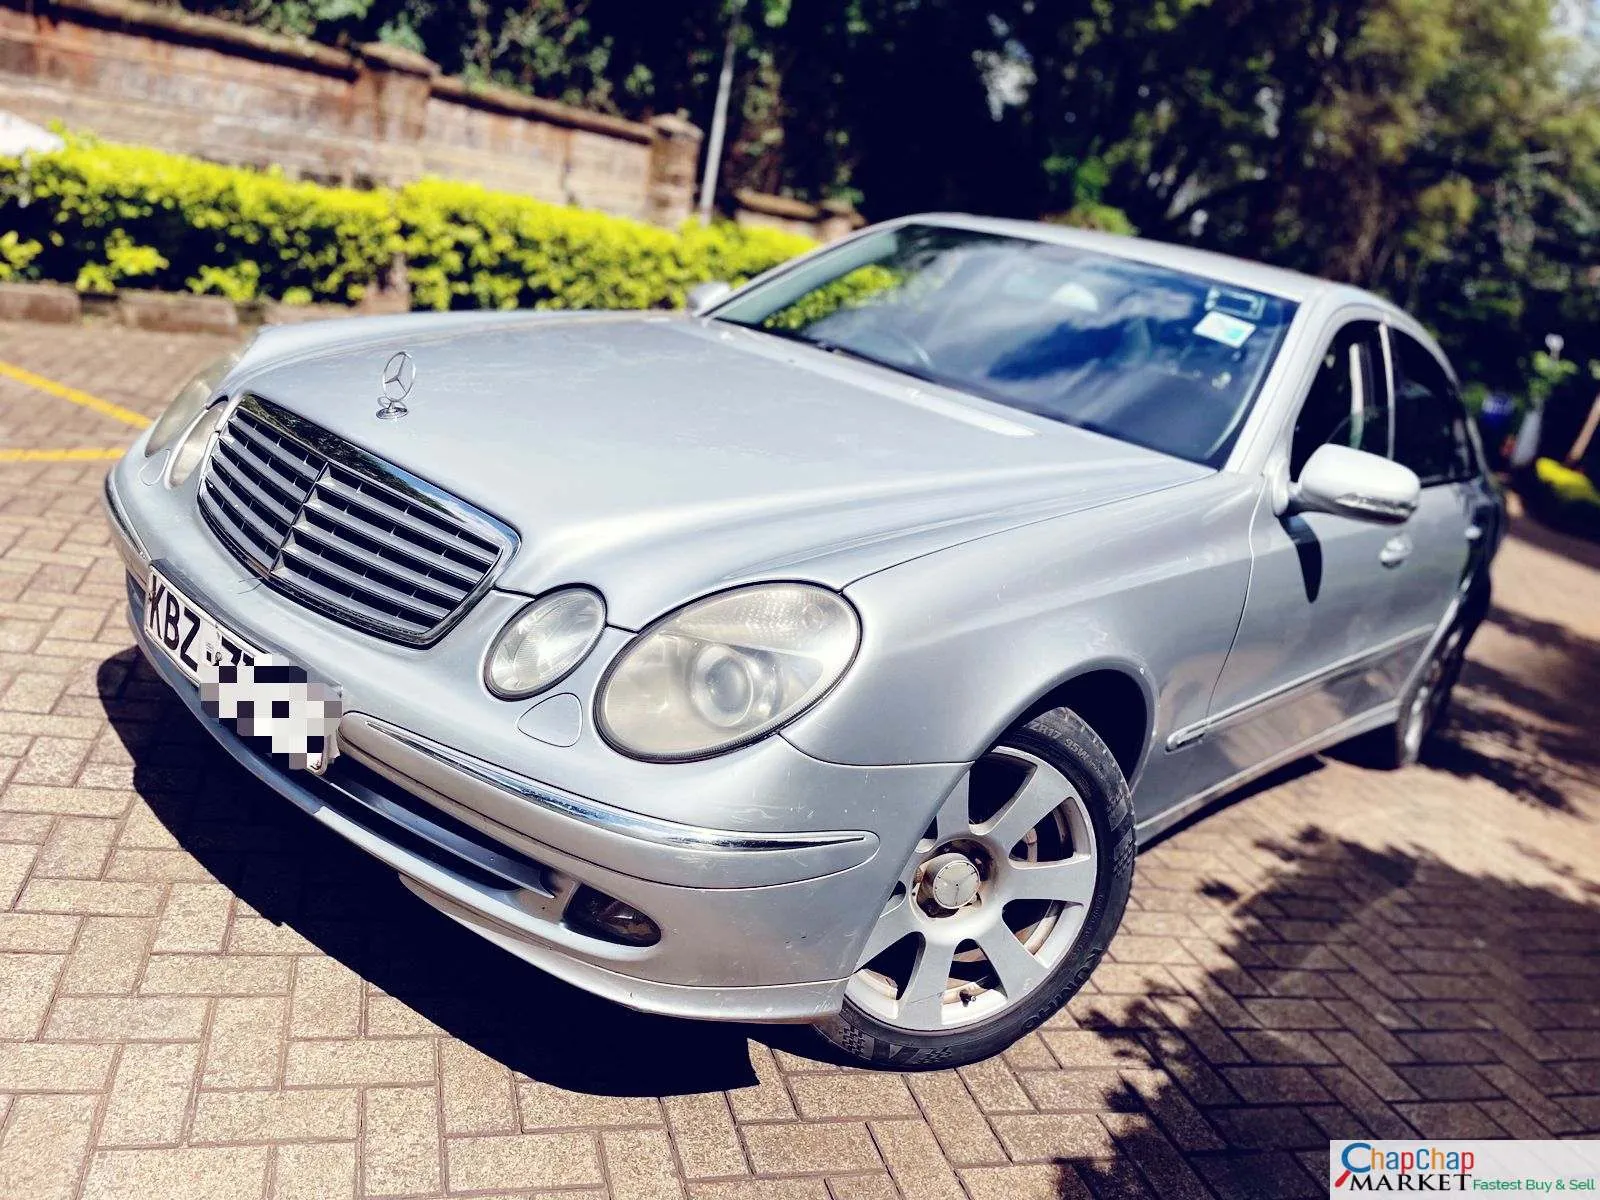 Mercedes Benz E240 Cheapest You Pay 30% DEPOSIT Trade in OK EXCLUSIVE (SOLD)